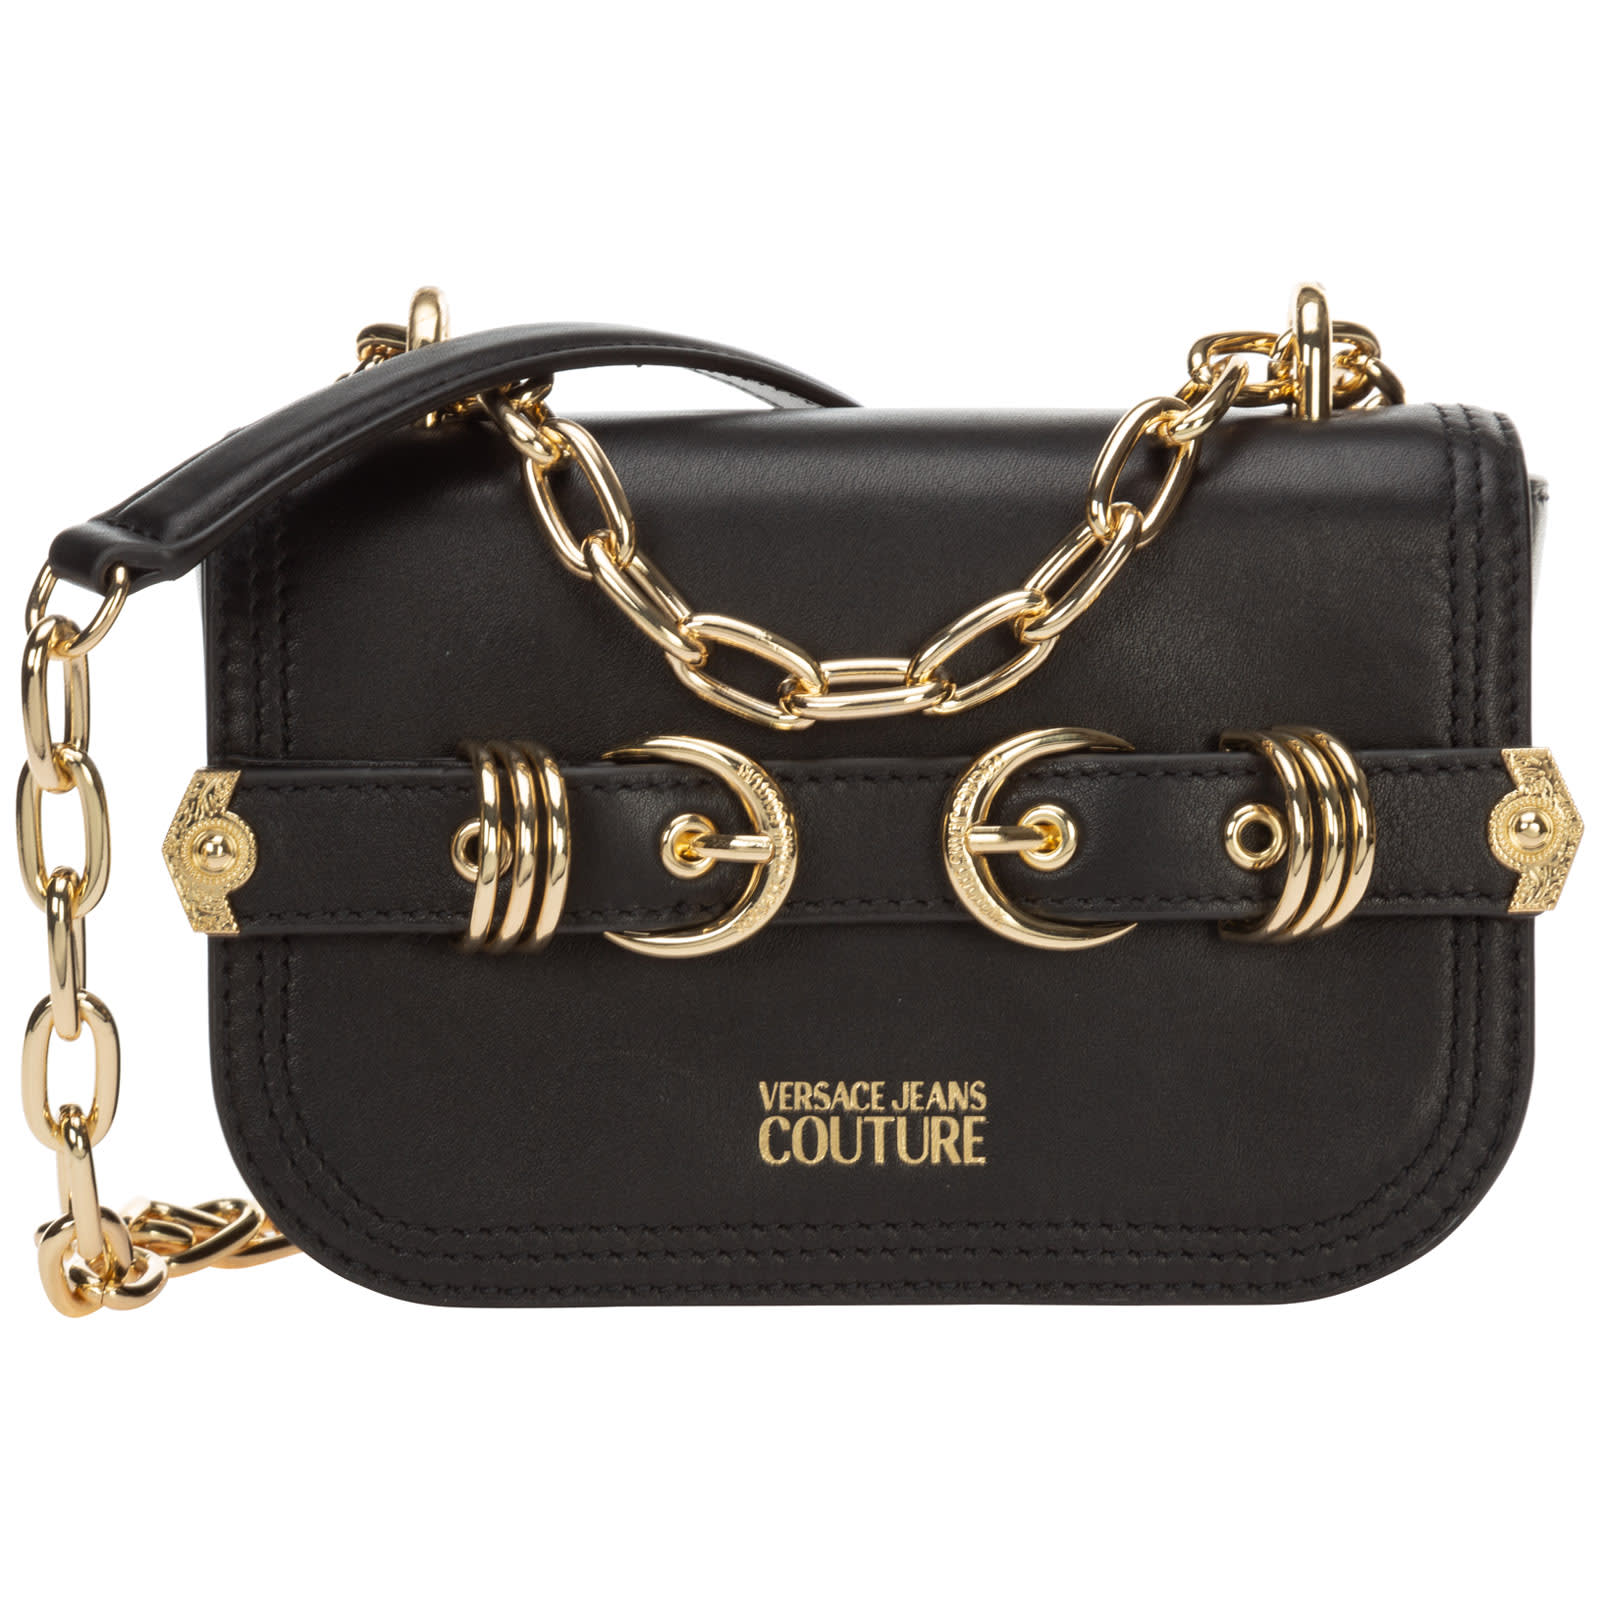 VERSACE JEANS COUTURE ICON CROSSBODY BAGS,11280810